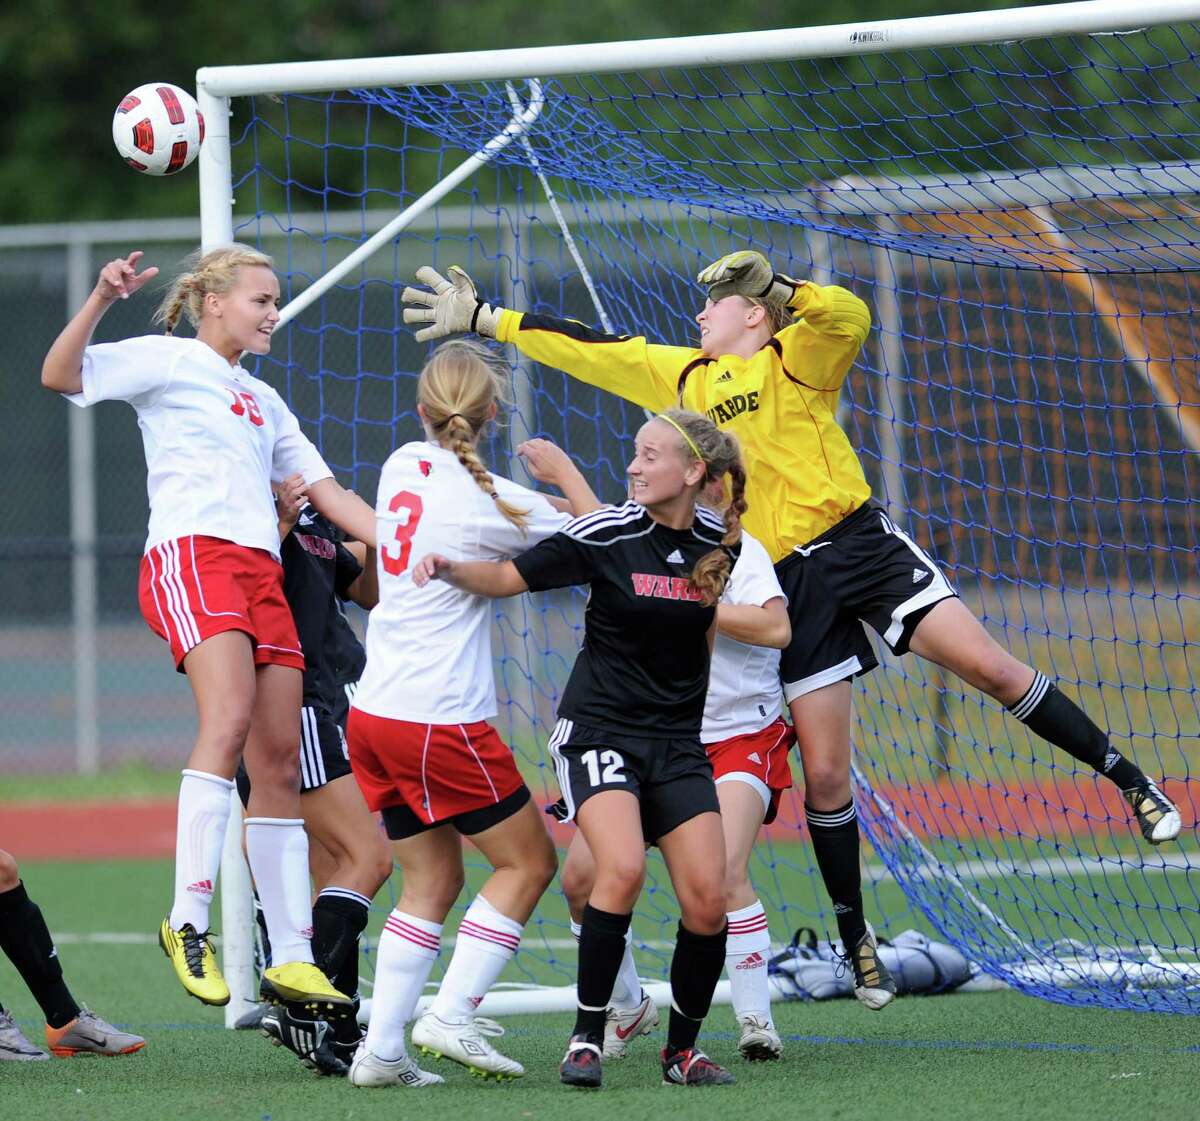 All-FCIAC goalie Katie Brennan, in yellow, reaching for the ball, again backstops a strong Fairfield Warde defense that has the Mustangs expecting big things in 2013.